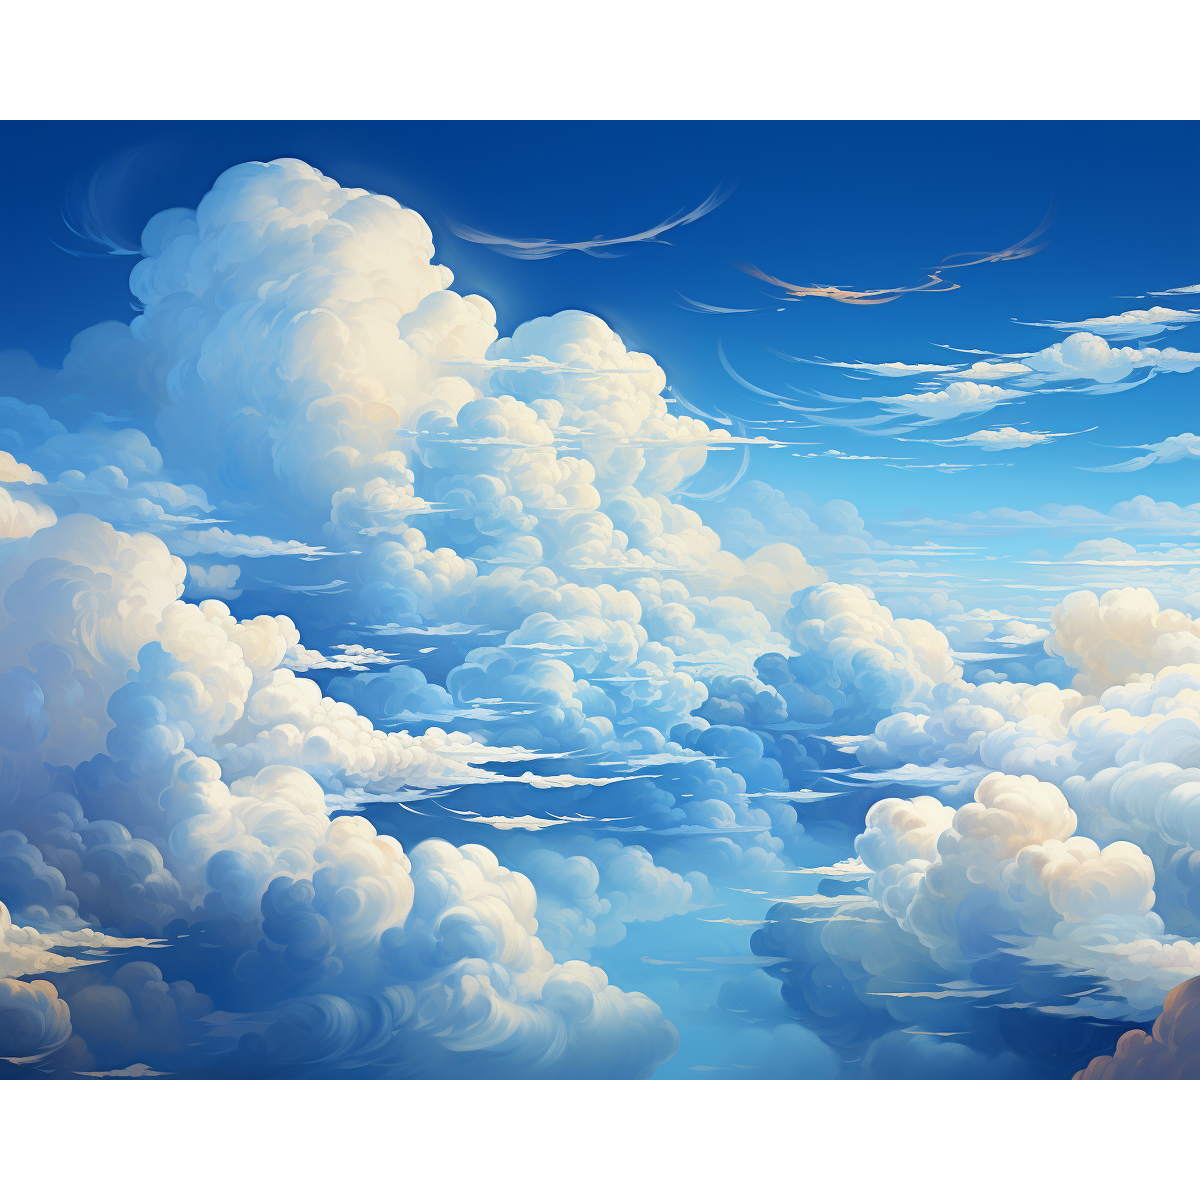 Endless Clouds Above